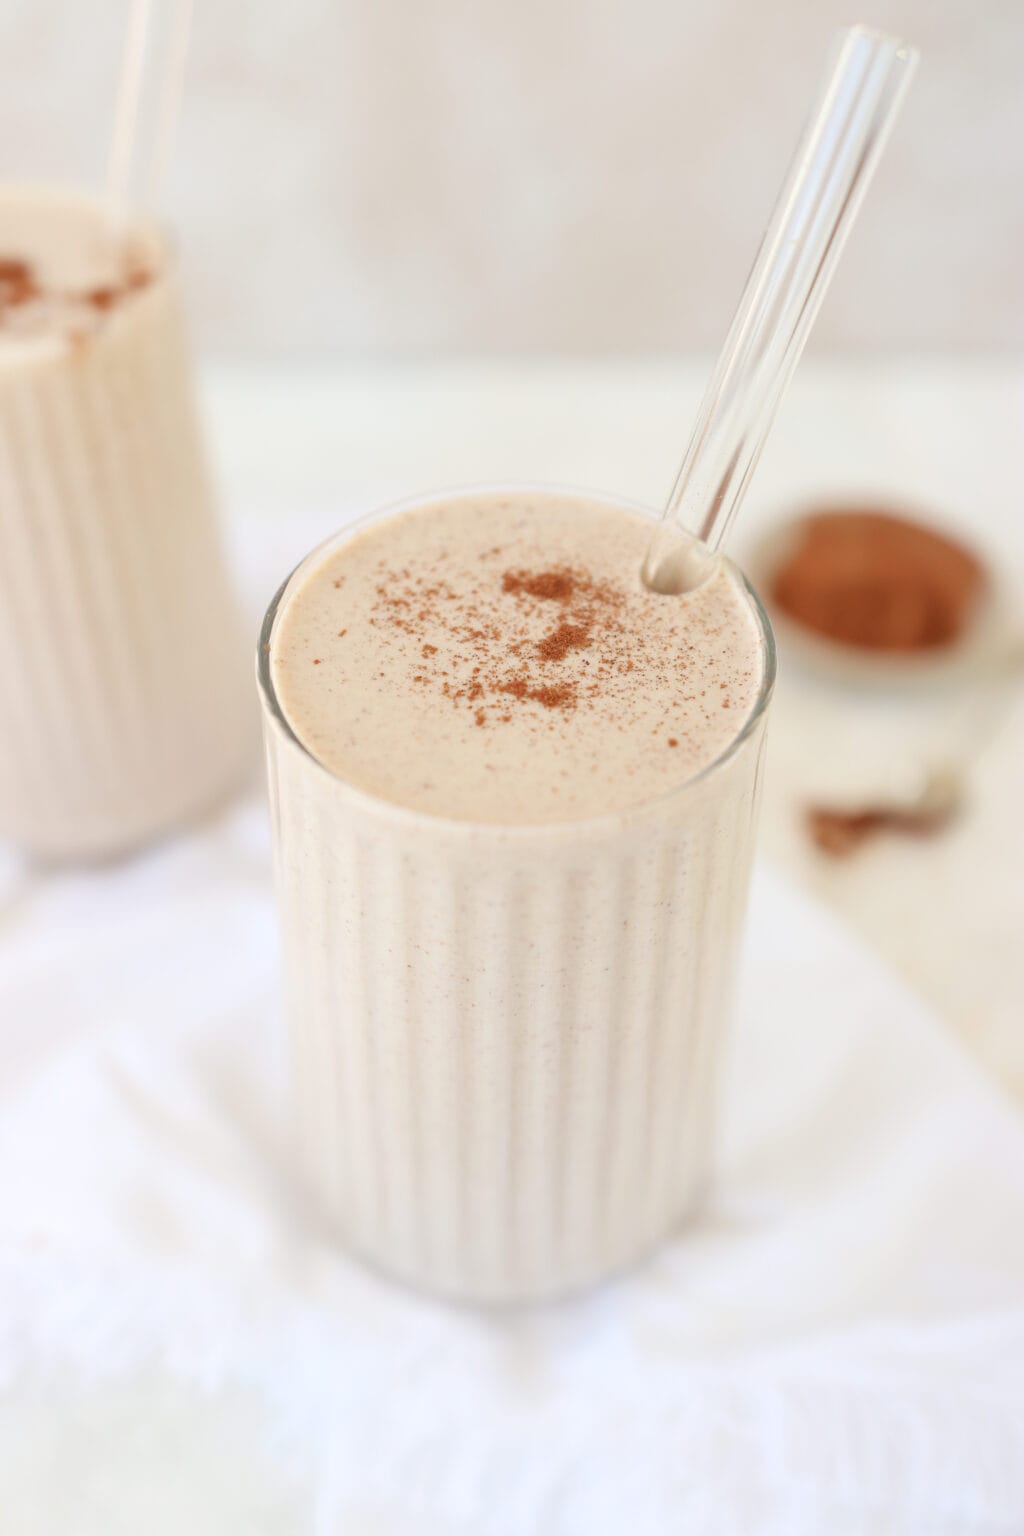 A cinnamon roll smoothie in a glass with a glass straw.